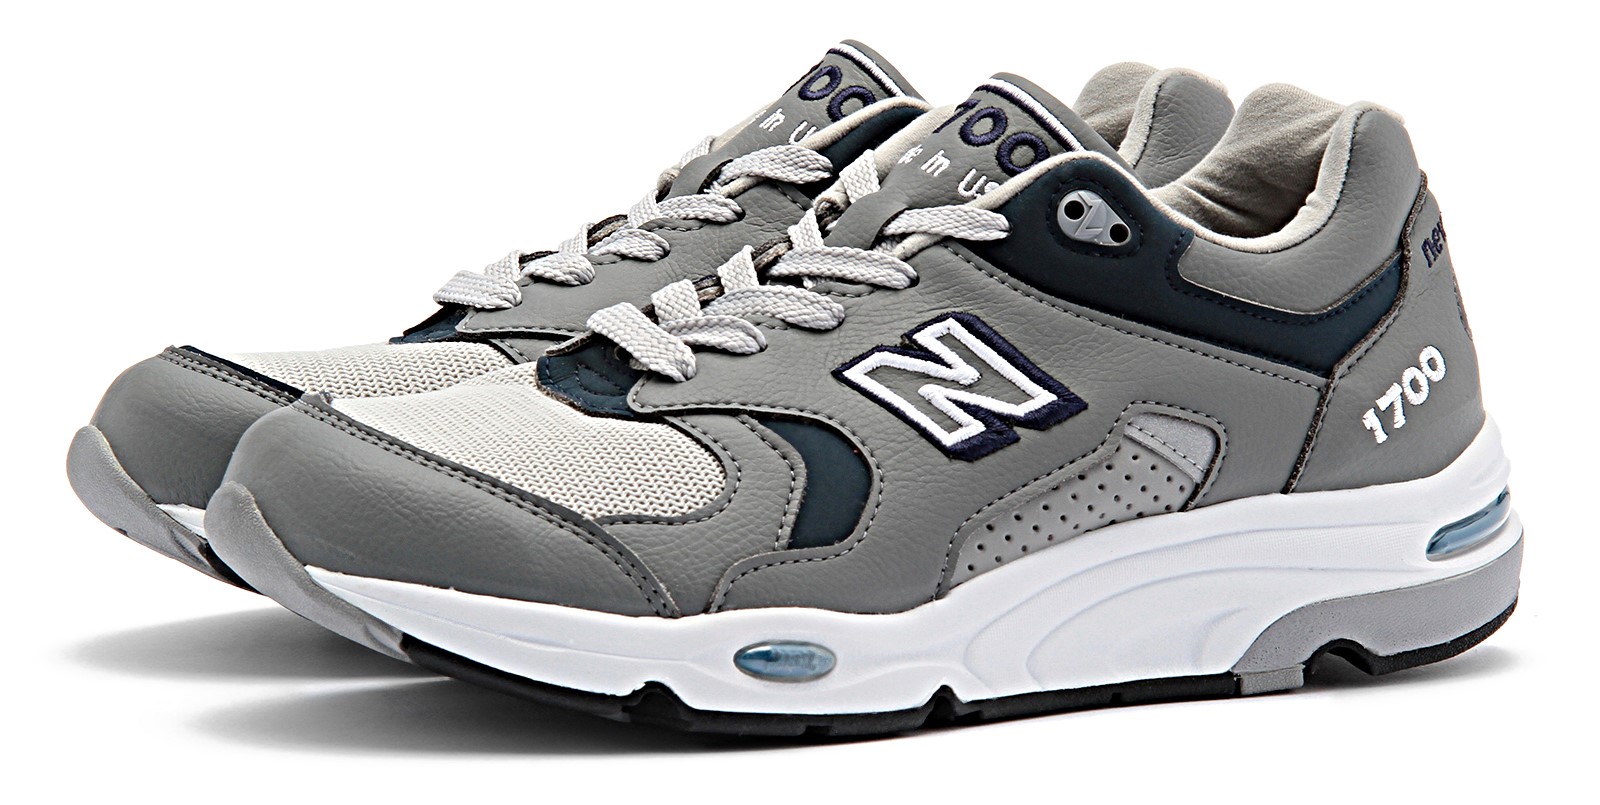 New Balance “M1700 OG” Made in U.S.A. | SHOES MASTER